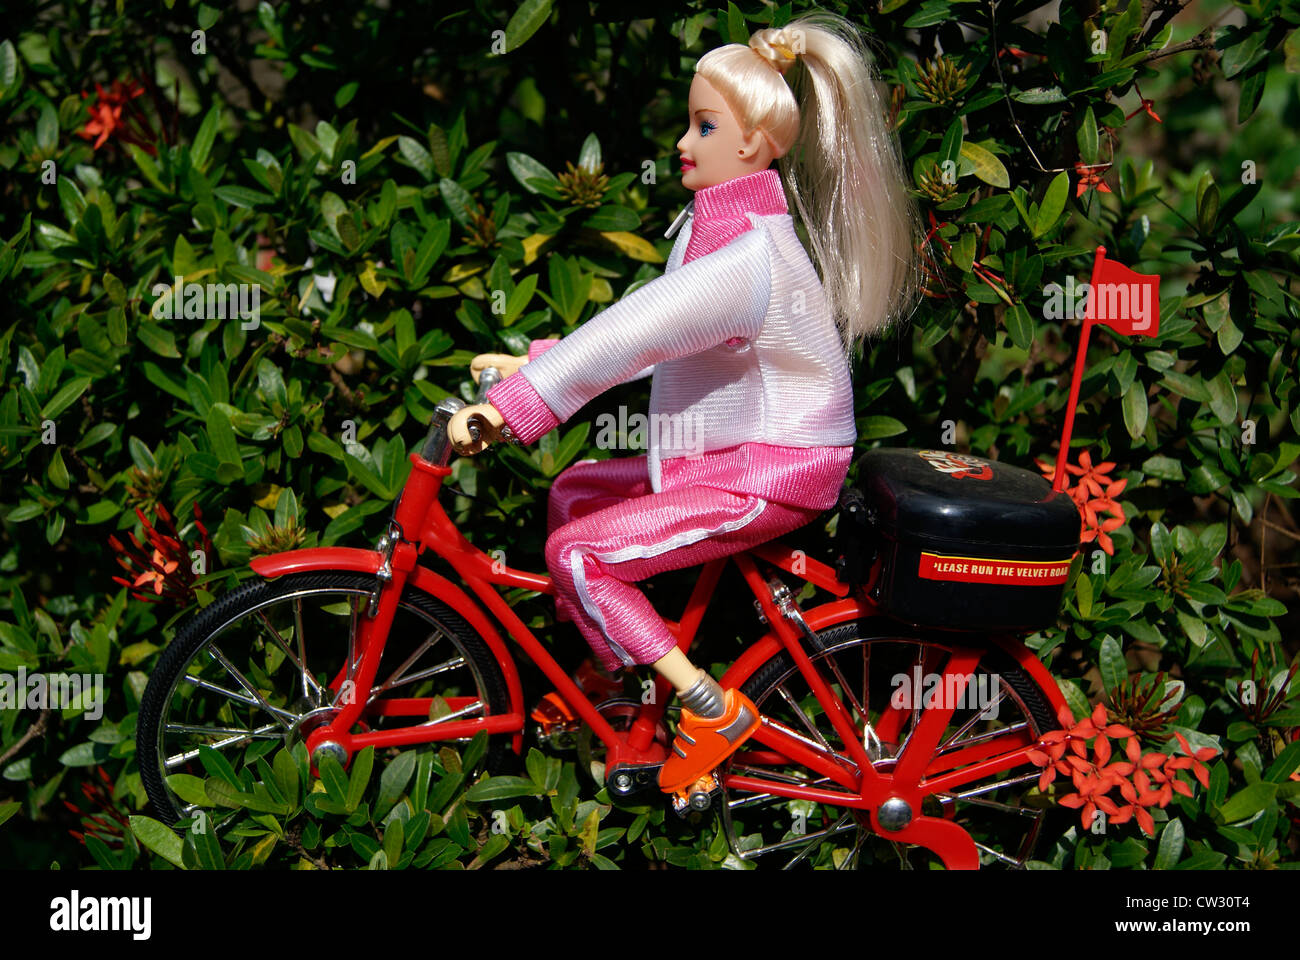 Barbie Doll Girl Riding cycle.Toy girl Rides bicycle through the Garden Scenery concept of toy Kids stories Stock Photo